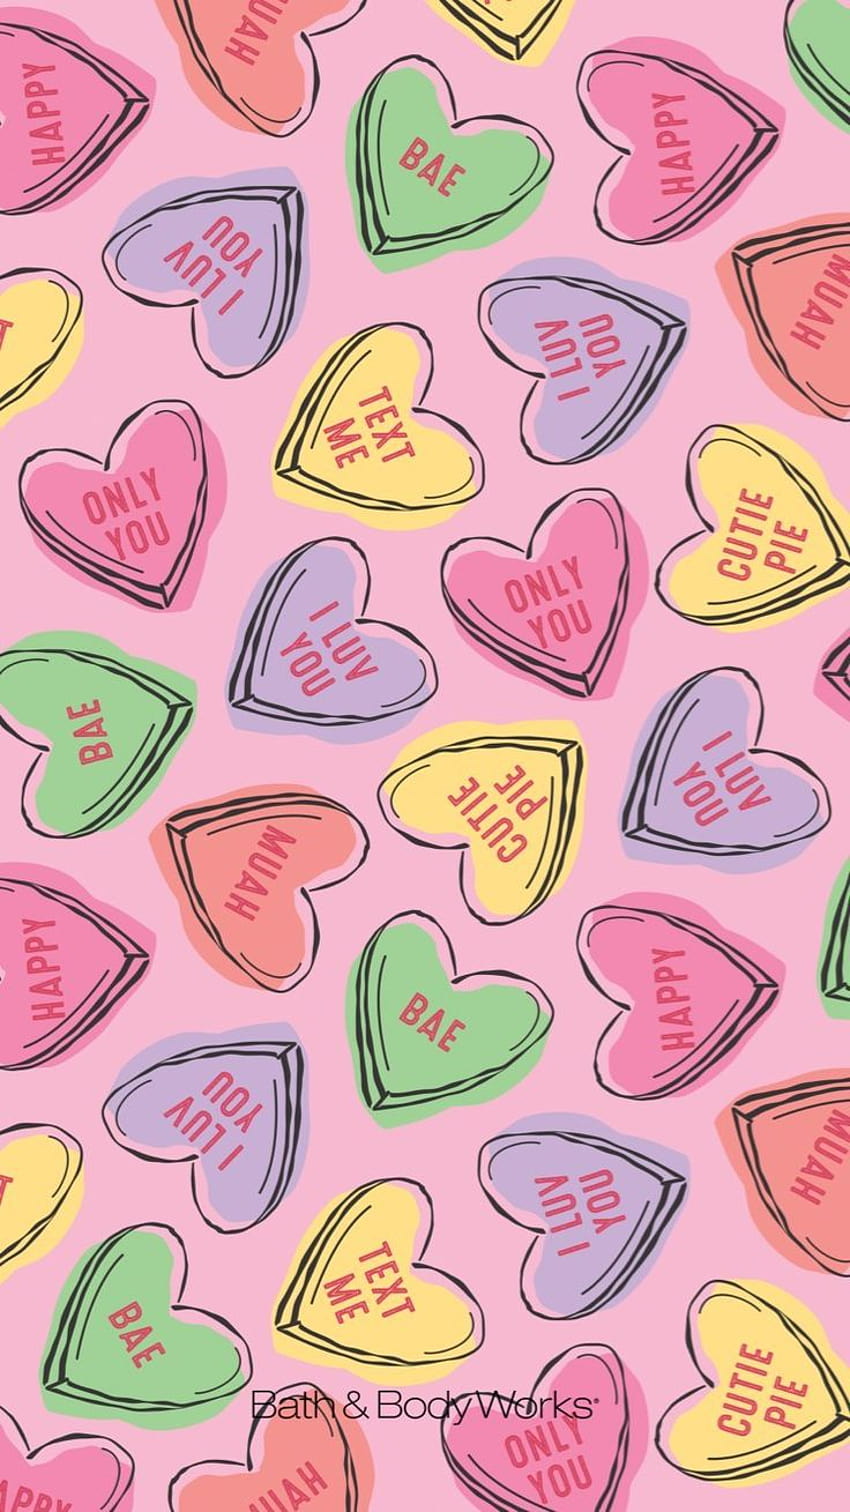 HD wallpaper heartshaped assortedcolor candies valentine candy hearts   Wallpaper Flare